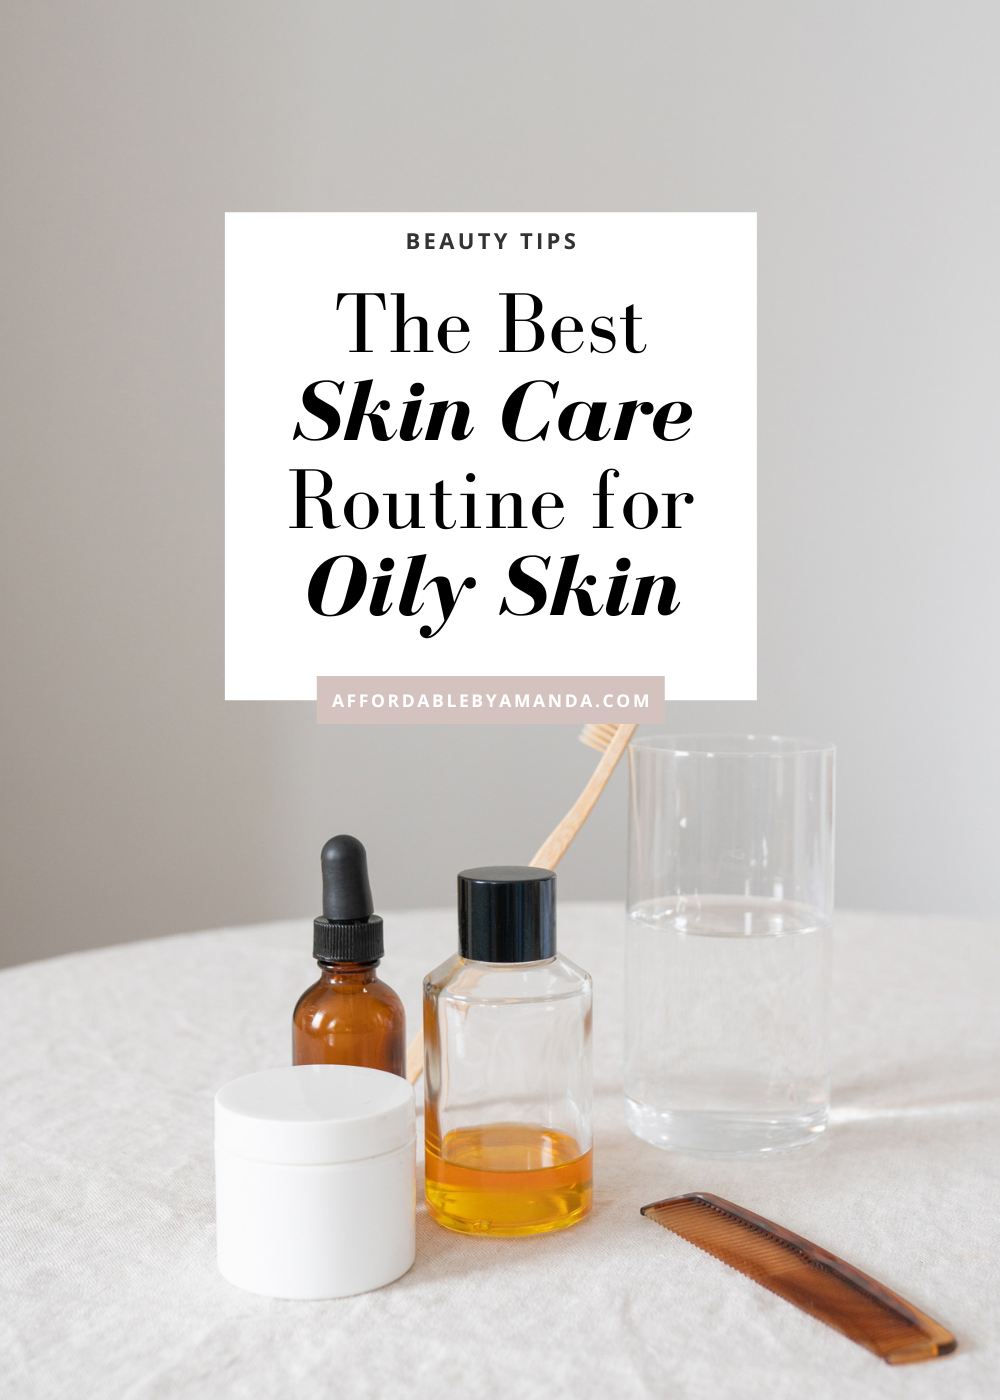 The Best Skin Care Routine For Oily Skin. Best of Acne Skincare of 2022 - Tips for Clear and Healthy Skin.